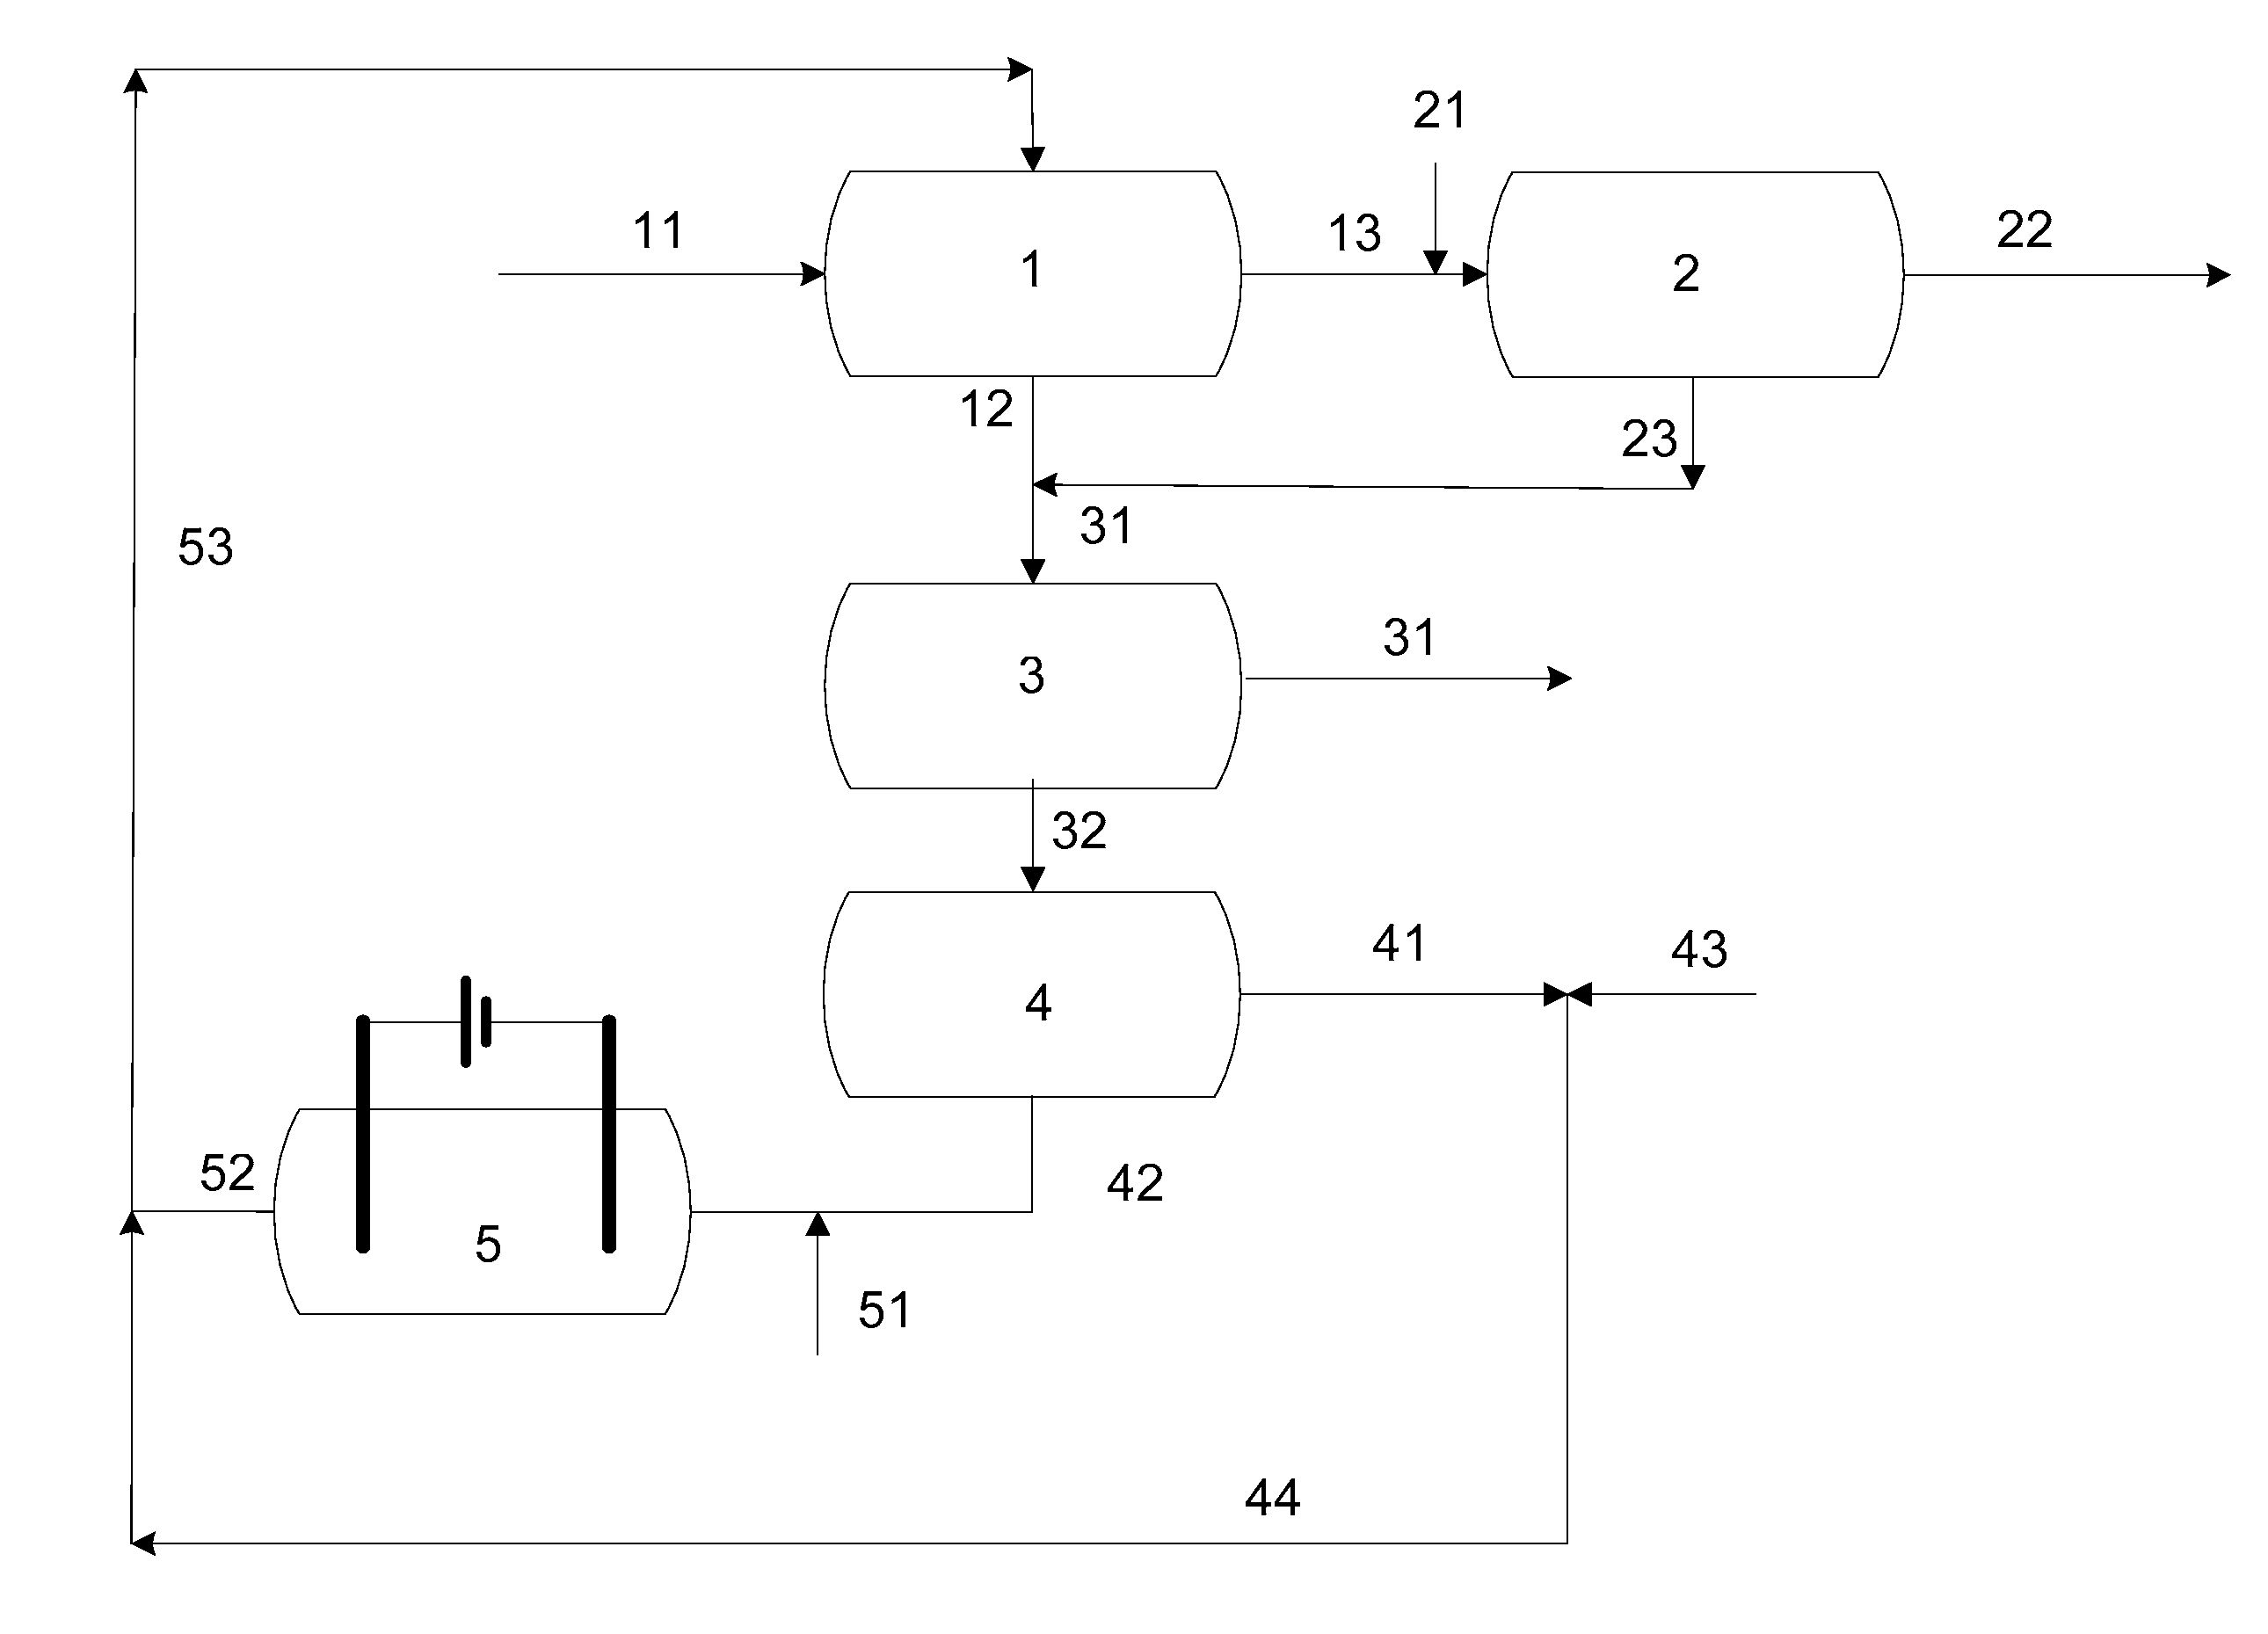 Method for reducing mercaptans in hydrocarbons